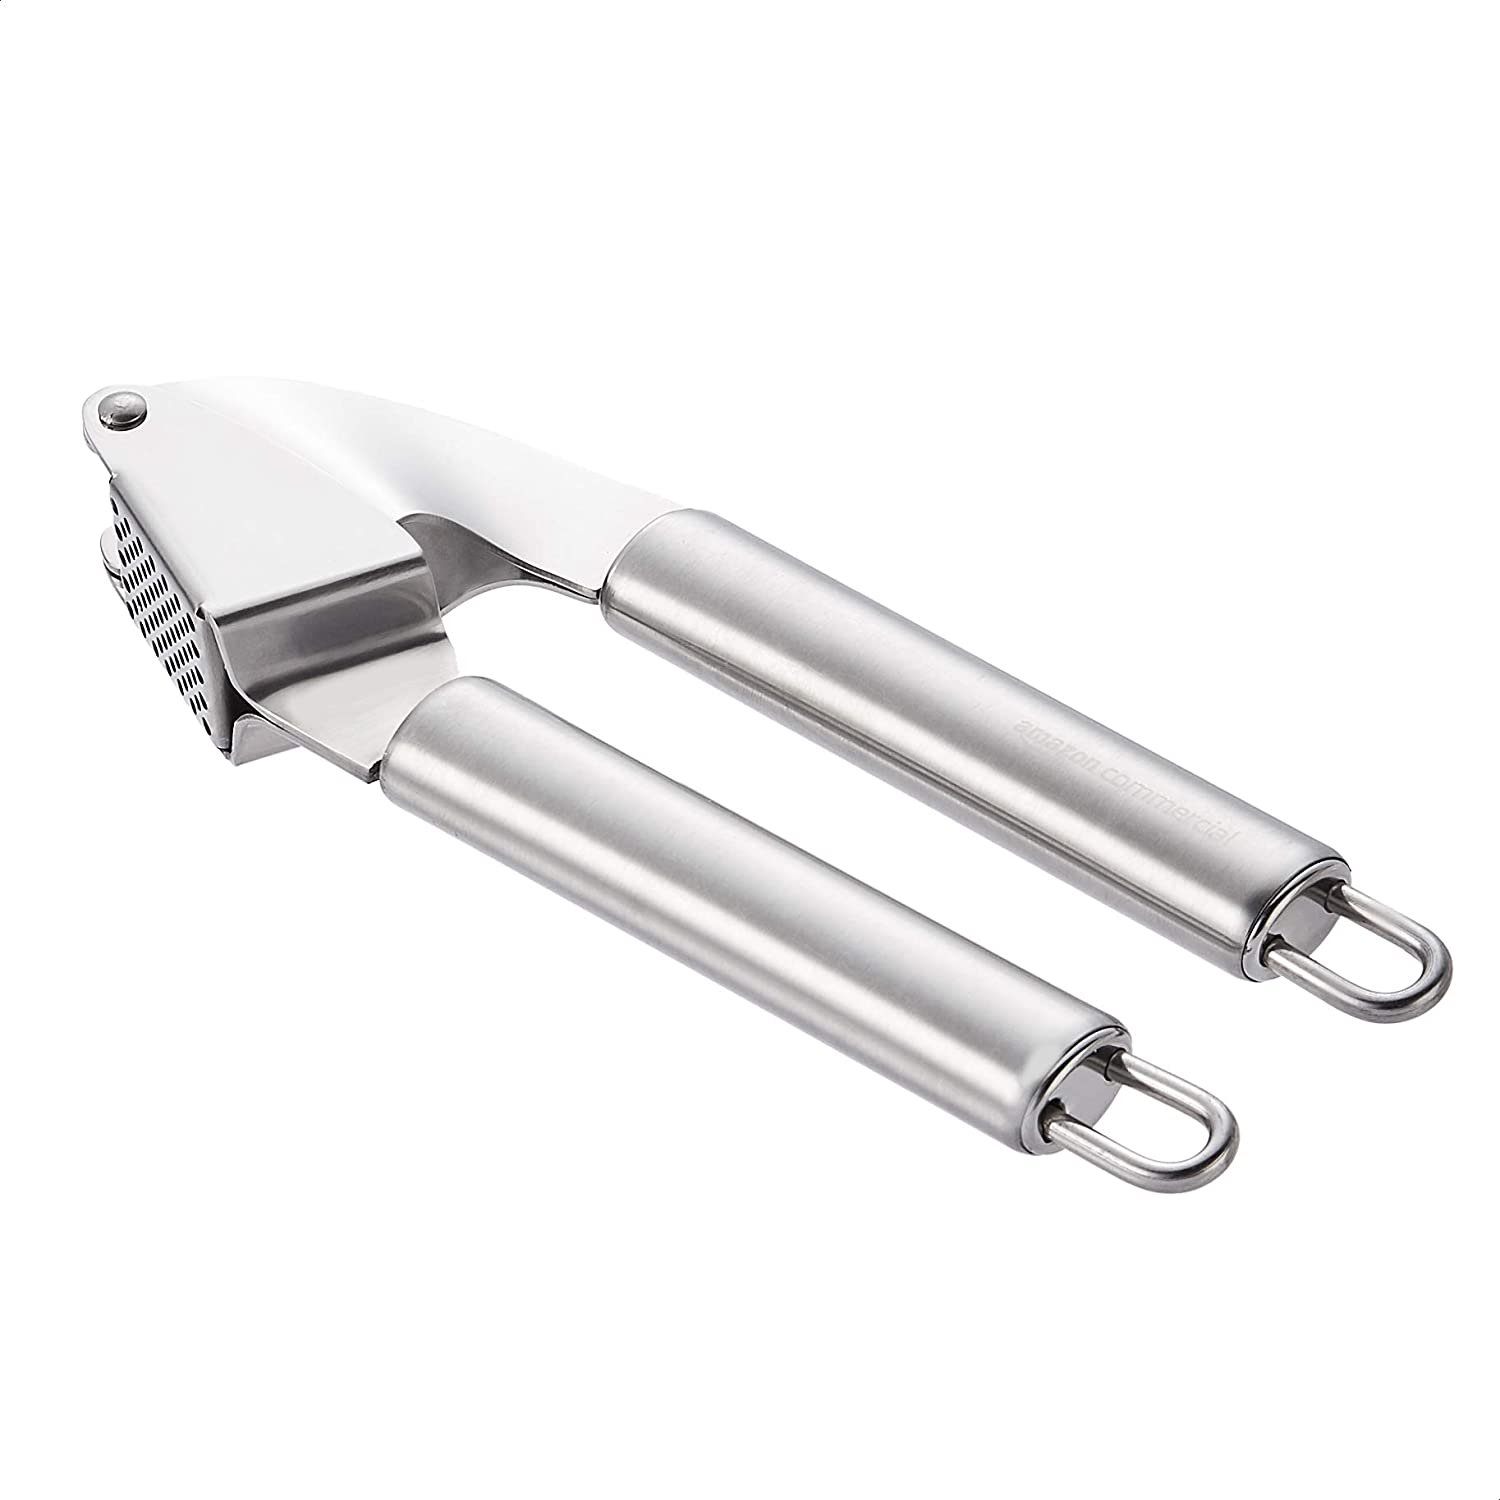 AmazonCommercial Stainless Steel Garlic Press Import To Shop ×Product customization General Description Gallery Reviews